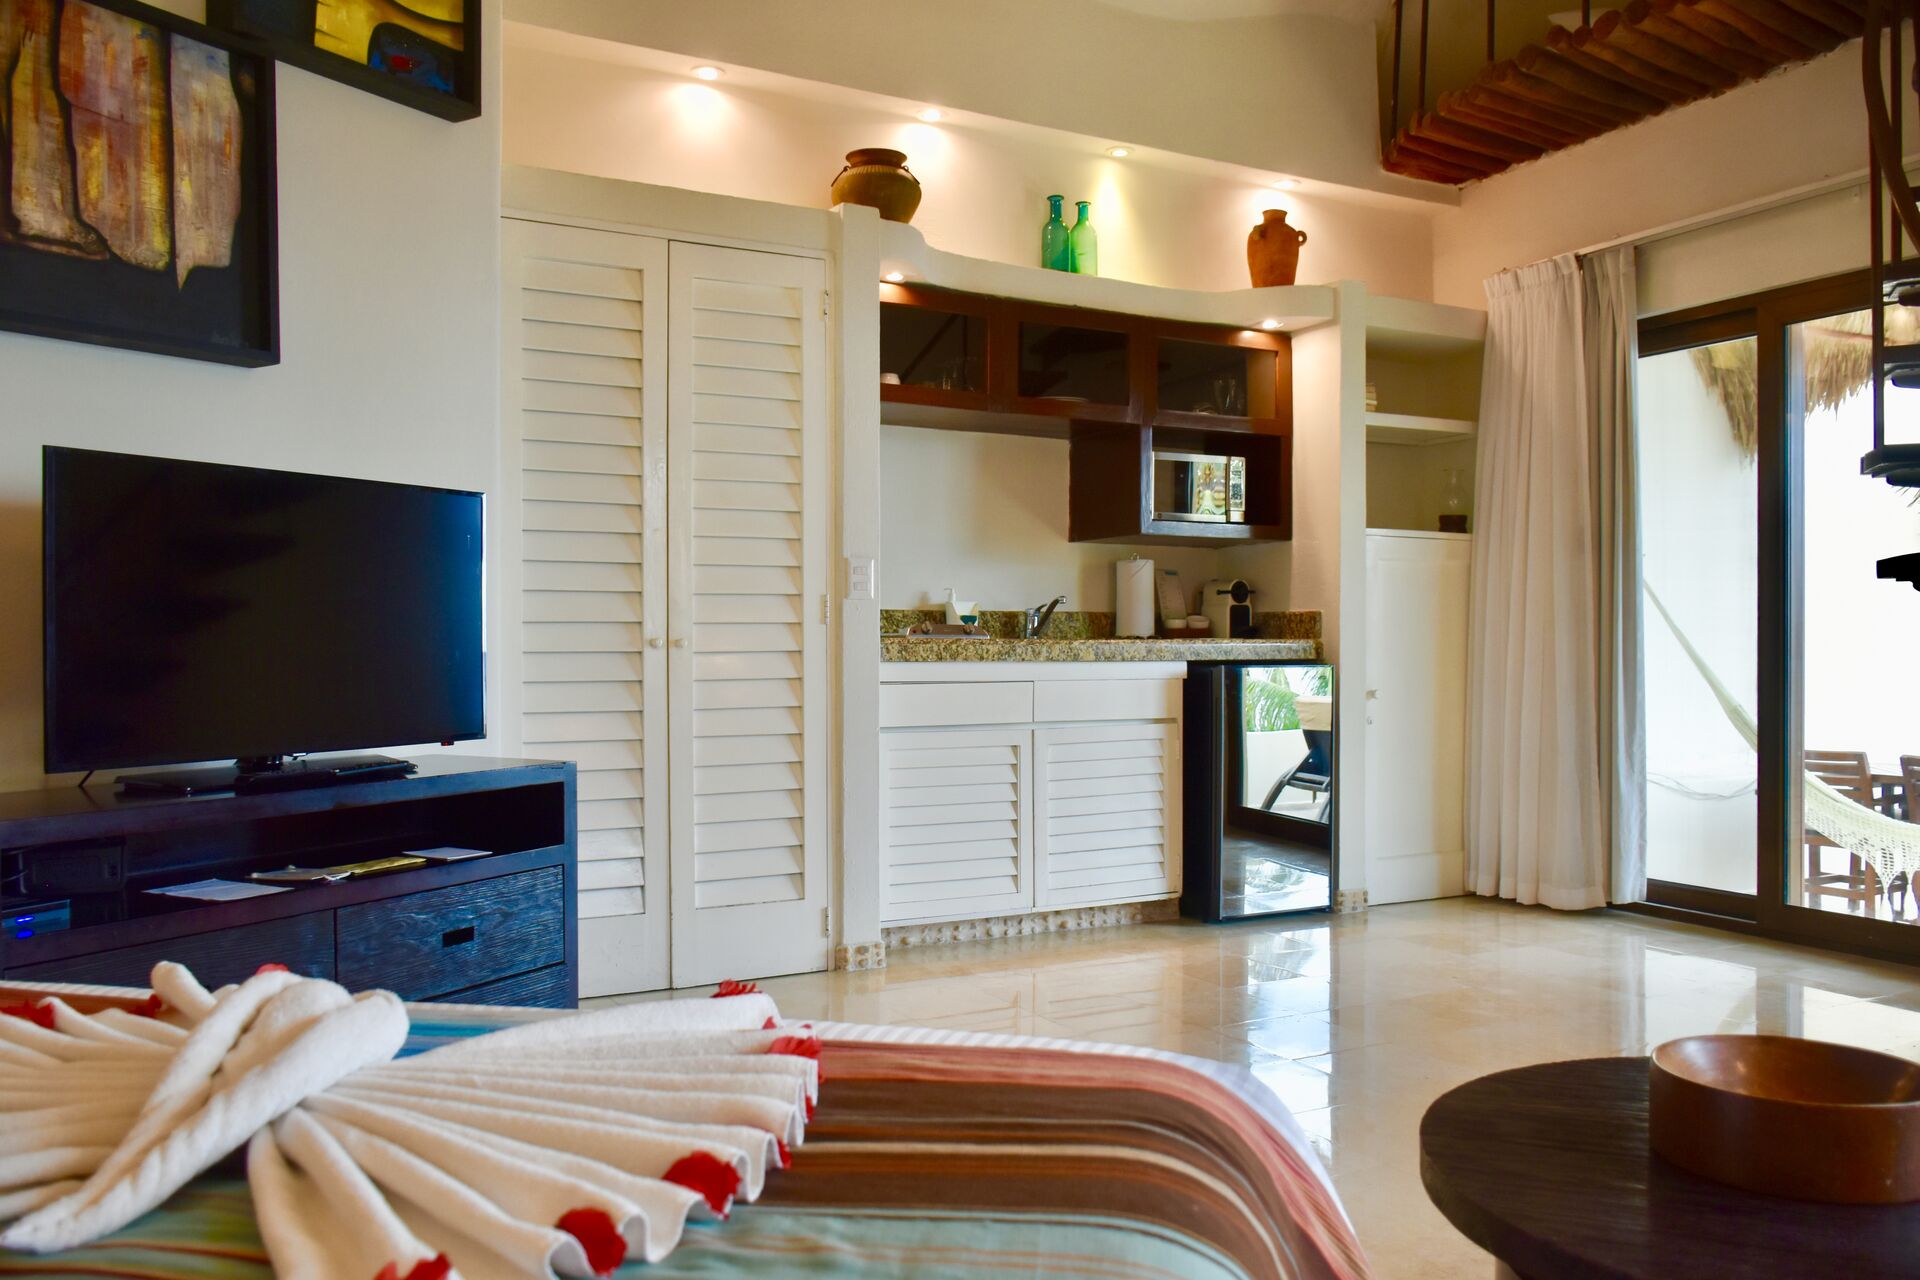 Fully furnished ocean front suite with queen size bed and kitchenette.